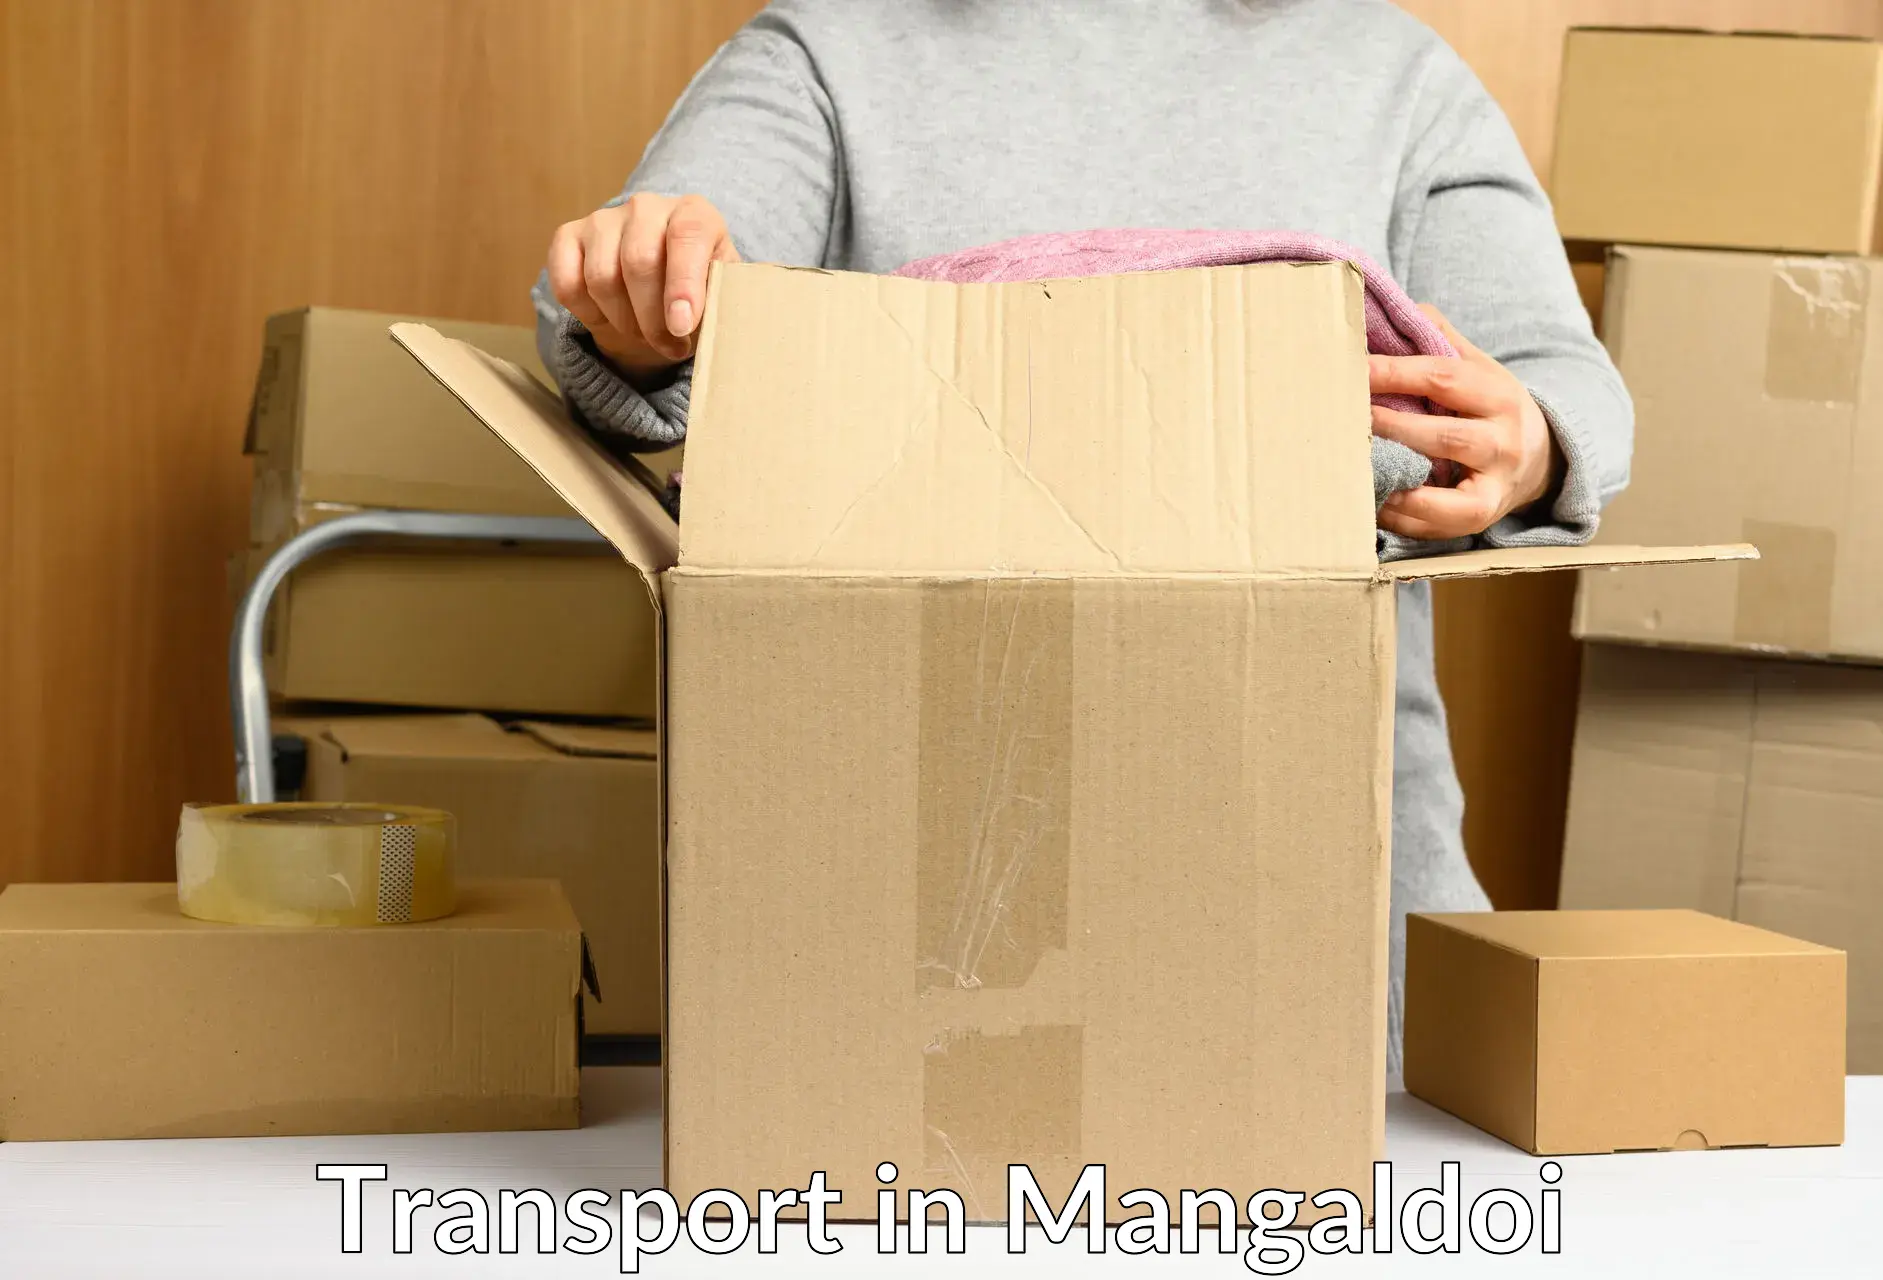 Air freight transport services in Mangaldoi